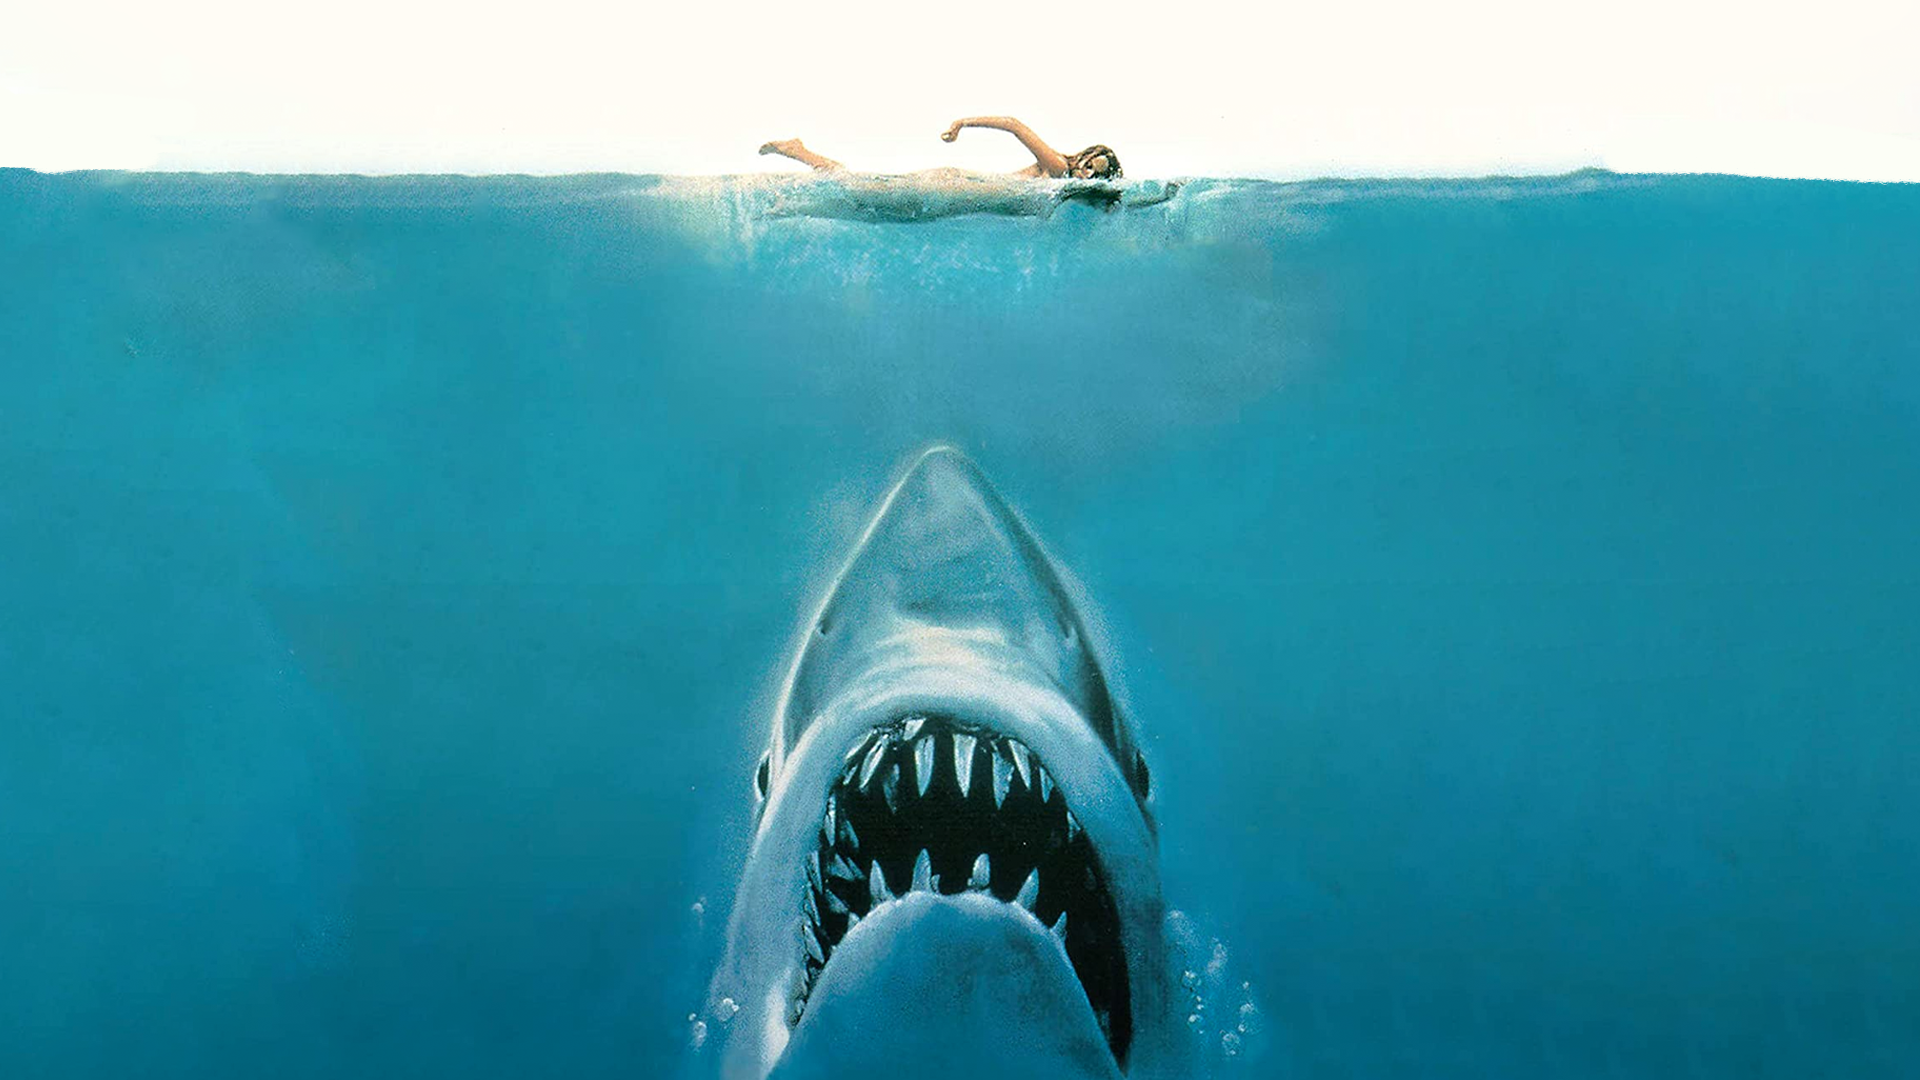 The story behind the iconic Jaws movie poster | Creative Bloq